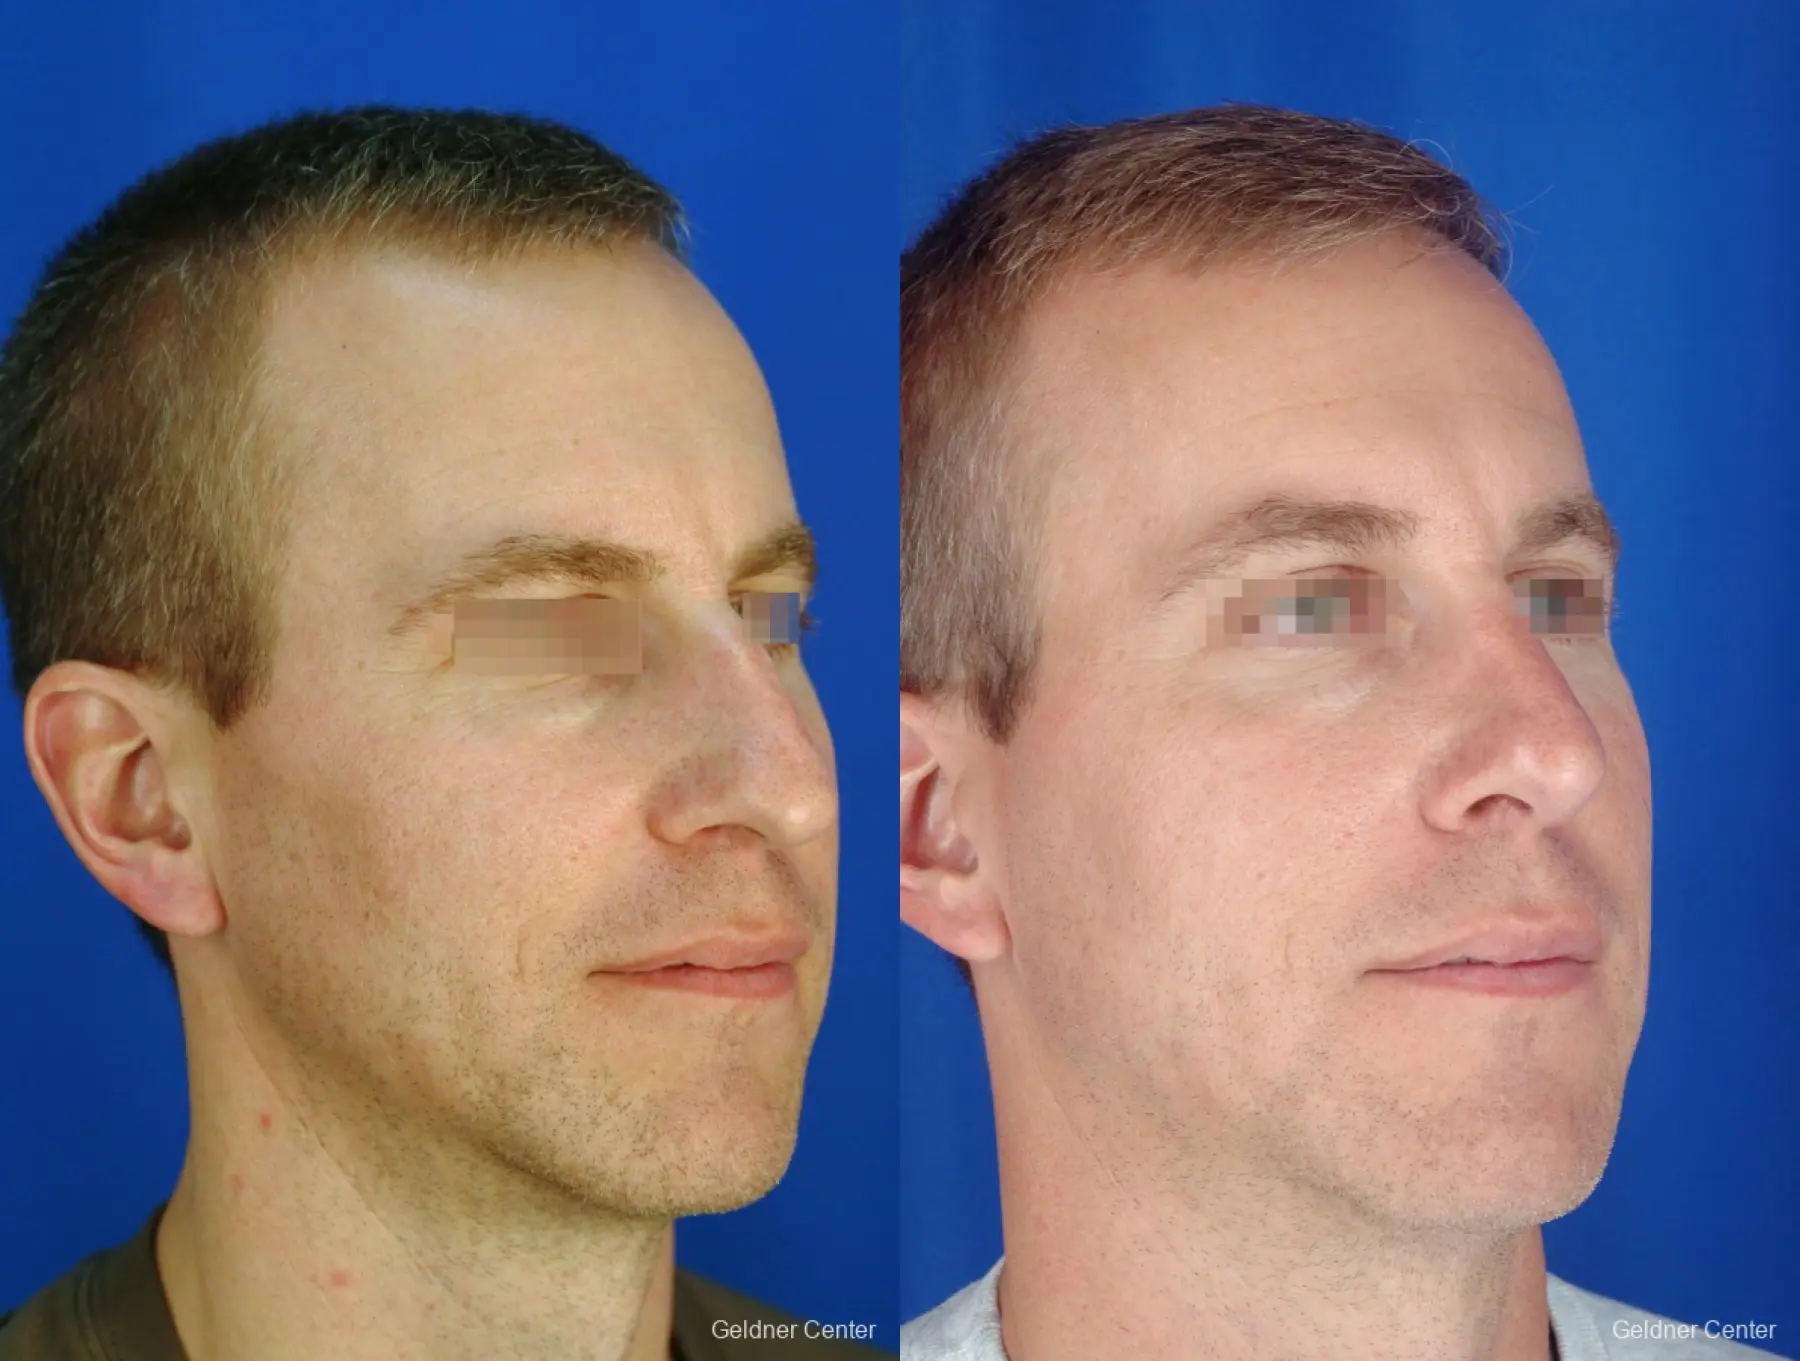 Rhinoplasty For Men: Patient 1 - Before and After 2